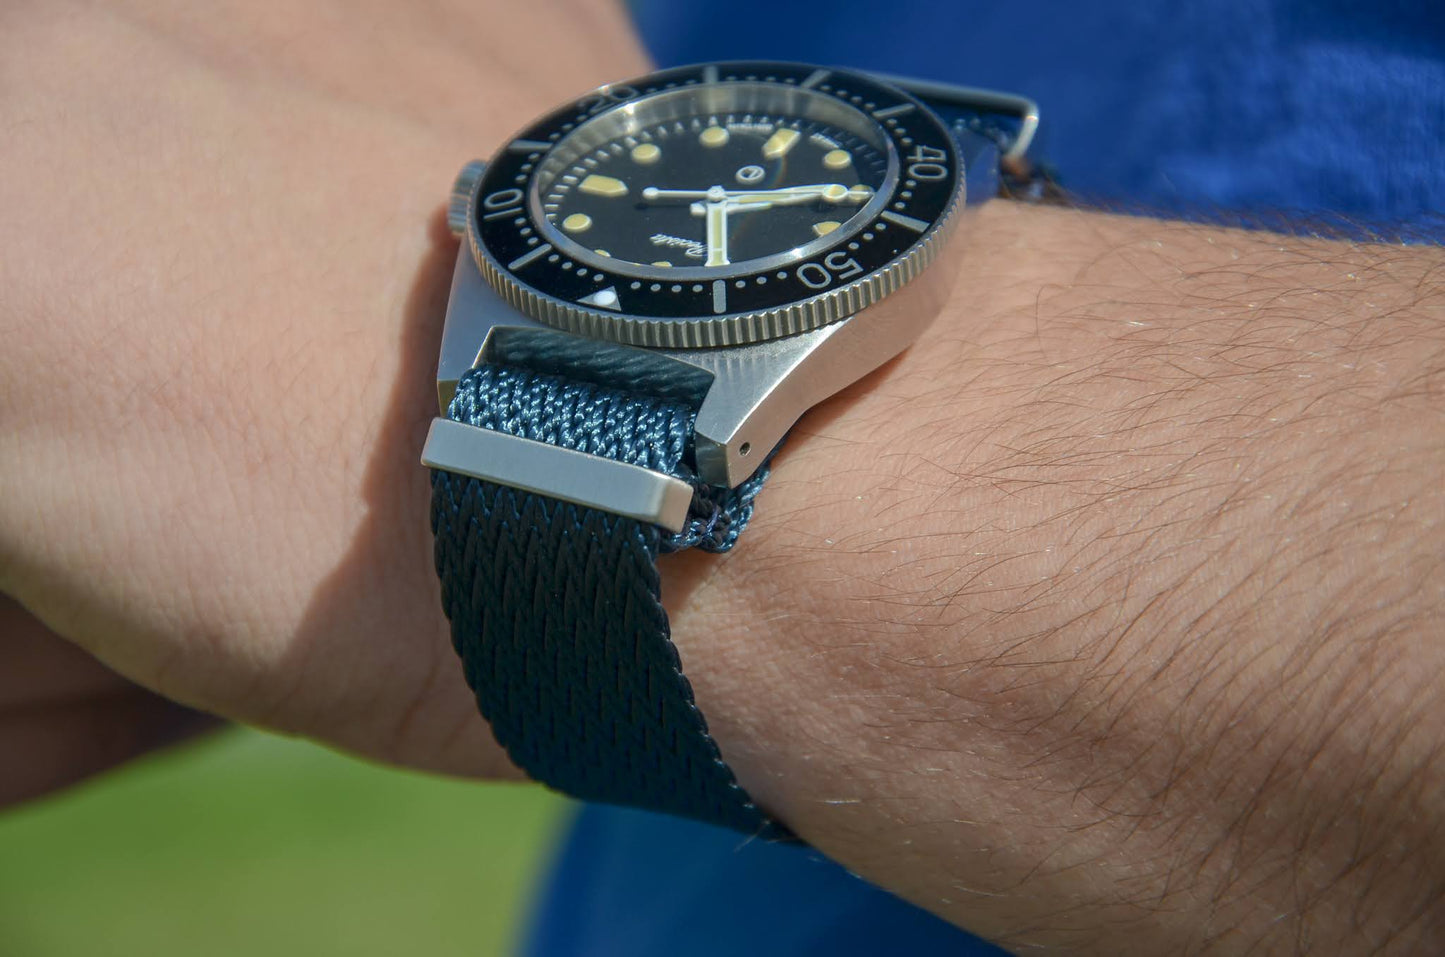 The 'Alexander' - Blue Herringbone patterned military watch strap made of a soft nylon